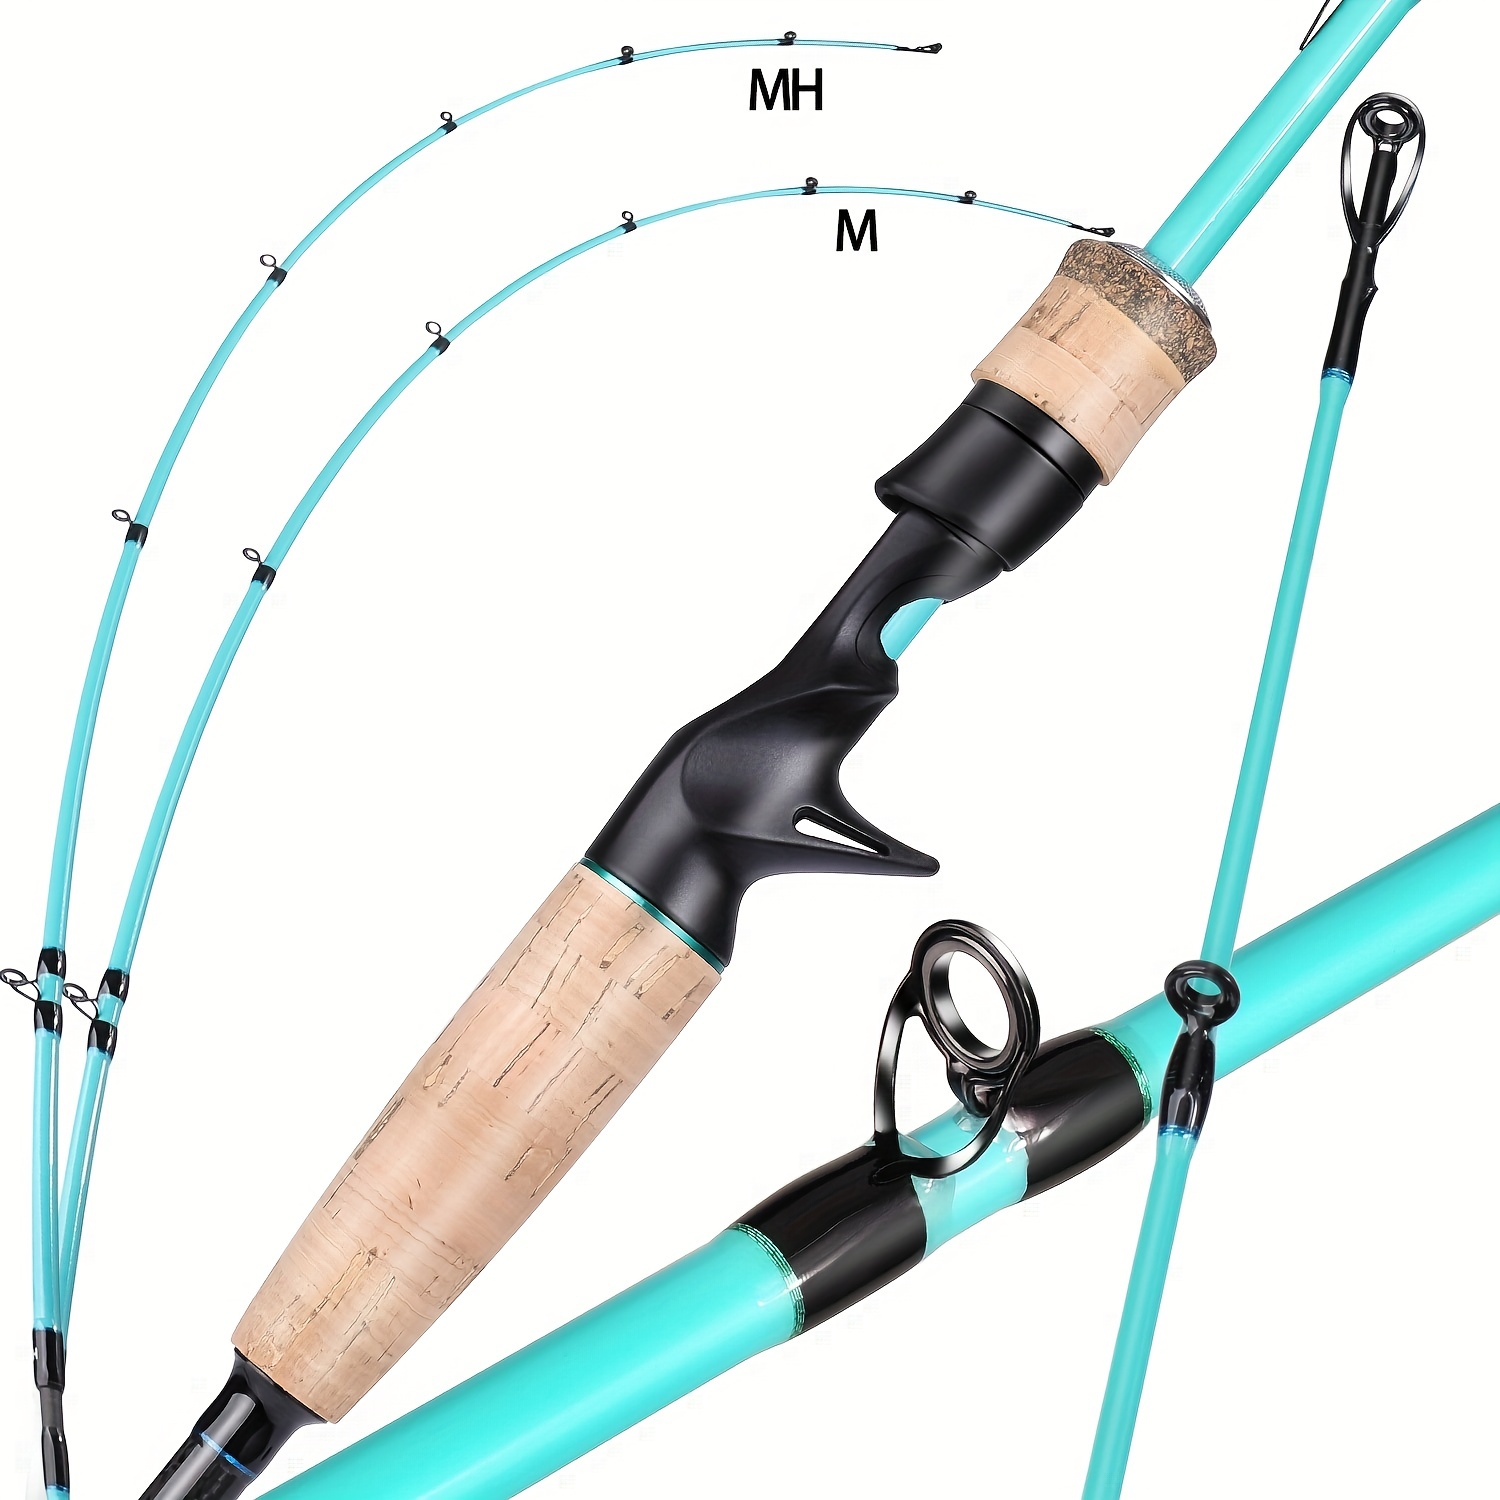 How to Choose Suitable Ultralight Fishing Rod?